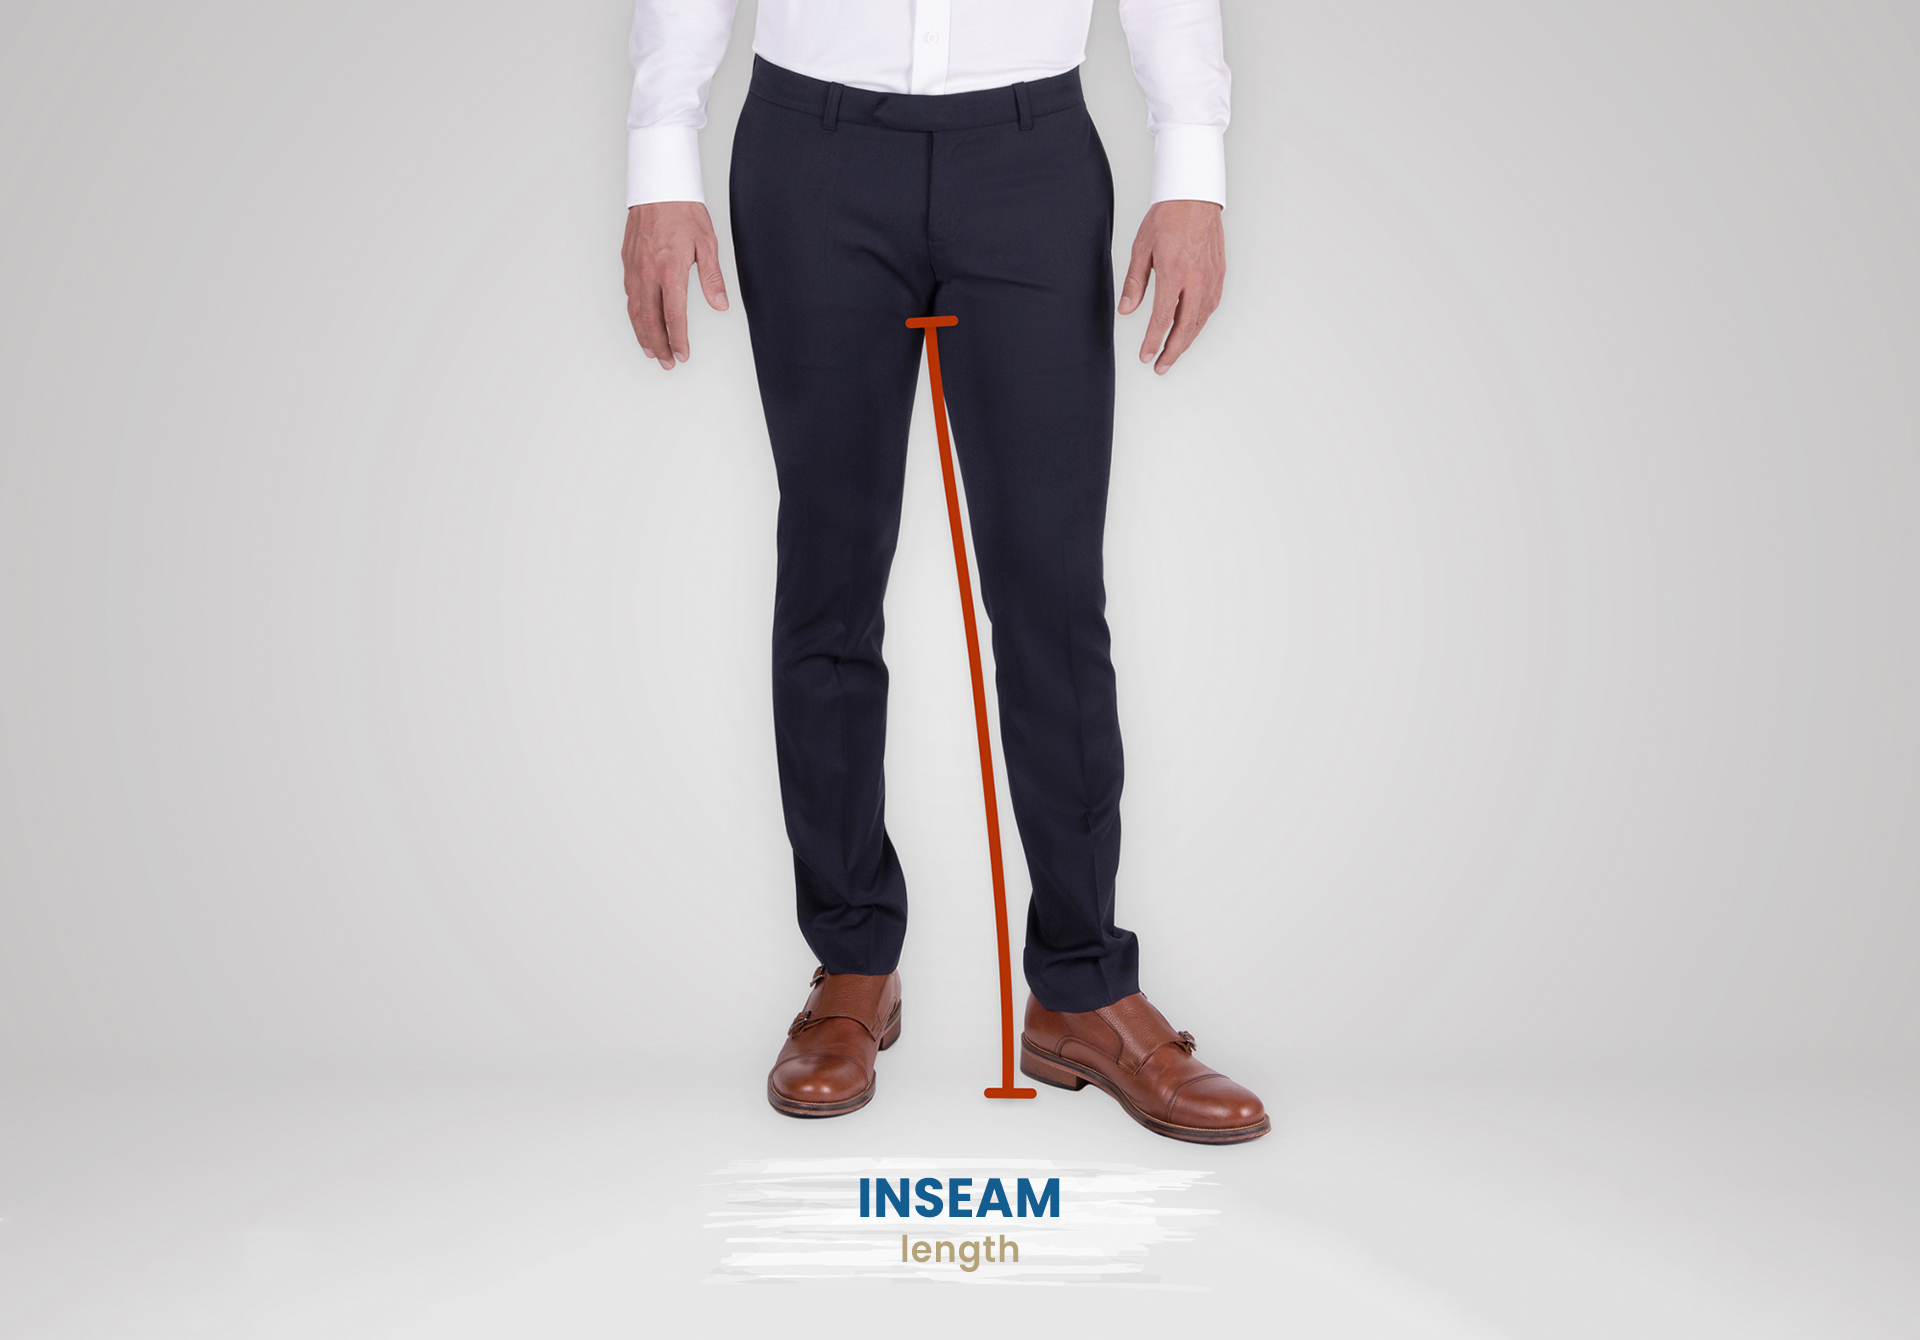 Fibre optic smart trousers monitor movement at a low cost